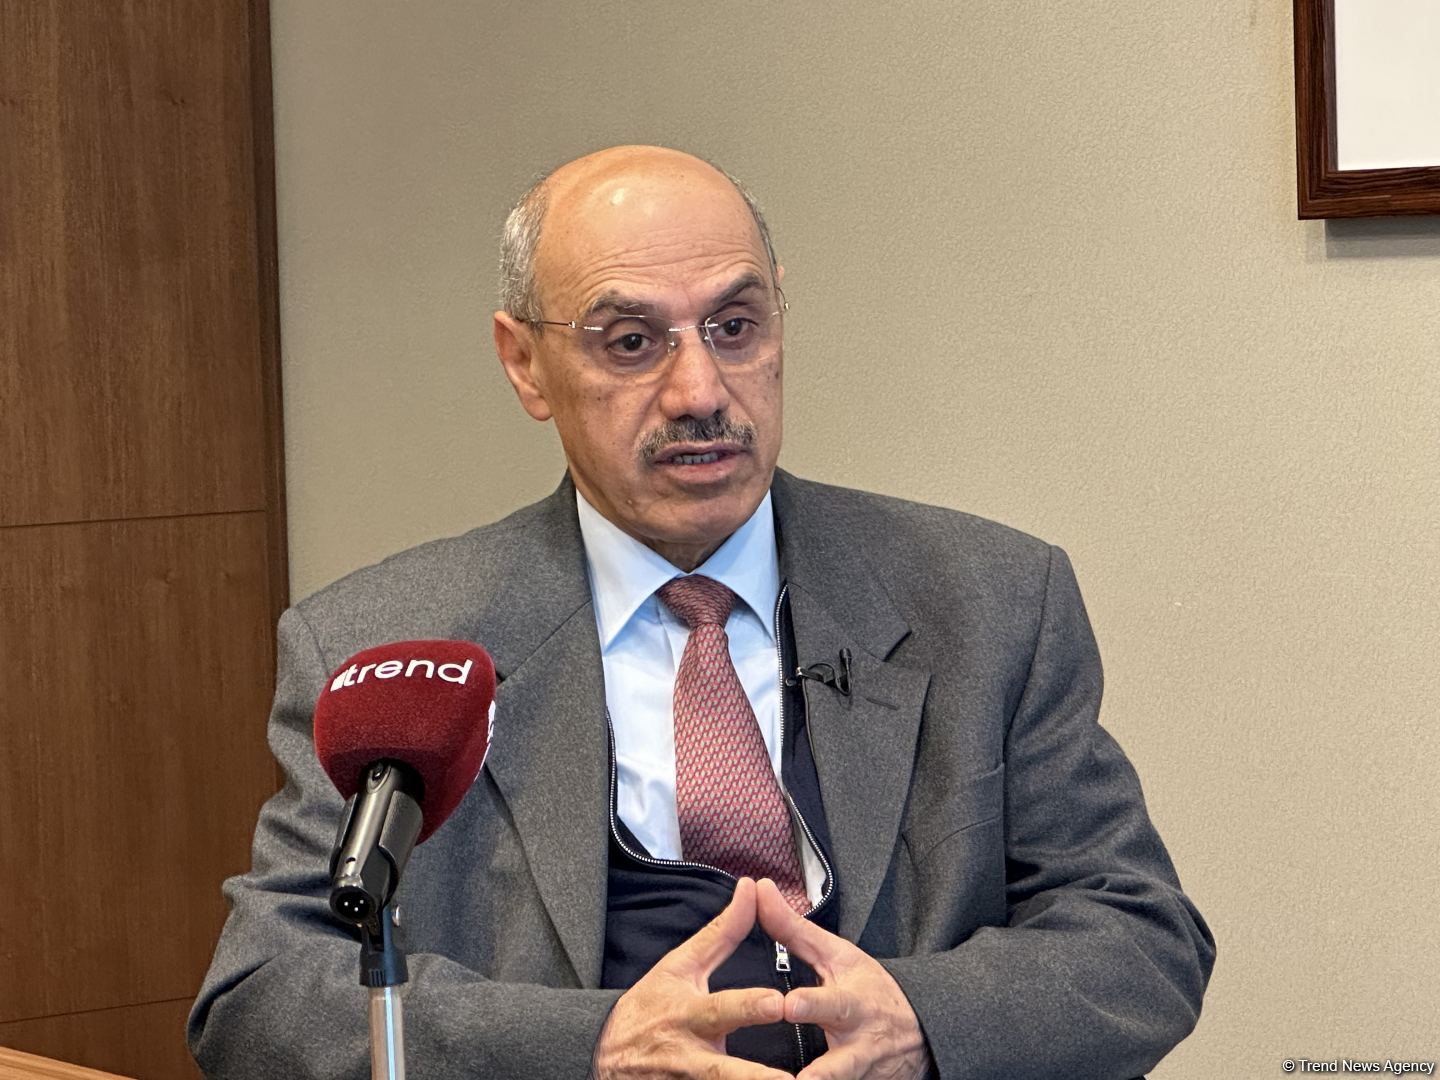 Islamic Development Bank eager to be part of reconstruction in Karabakh - Muhammad Sulaiman Al Jasser (Interview) (VIDEO/PHOTO)